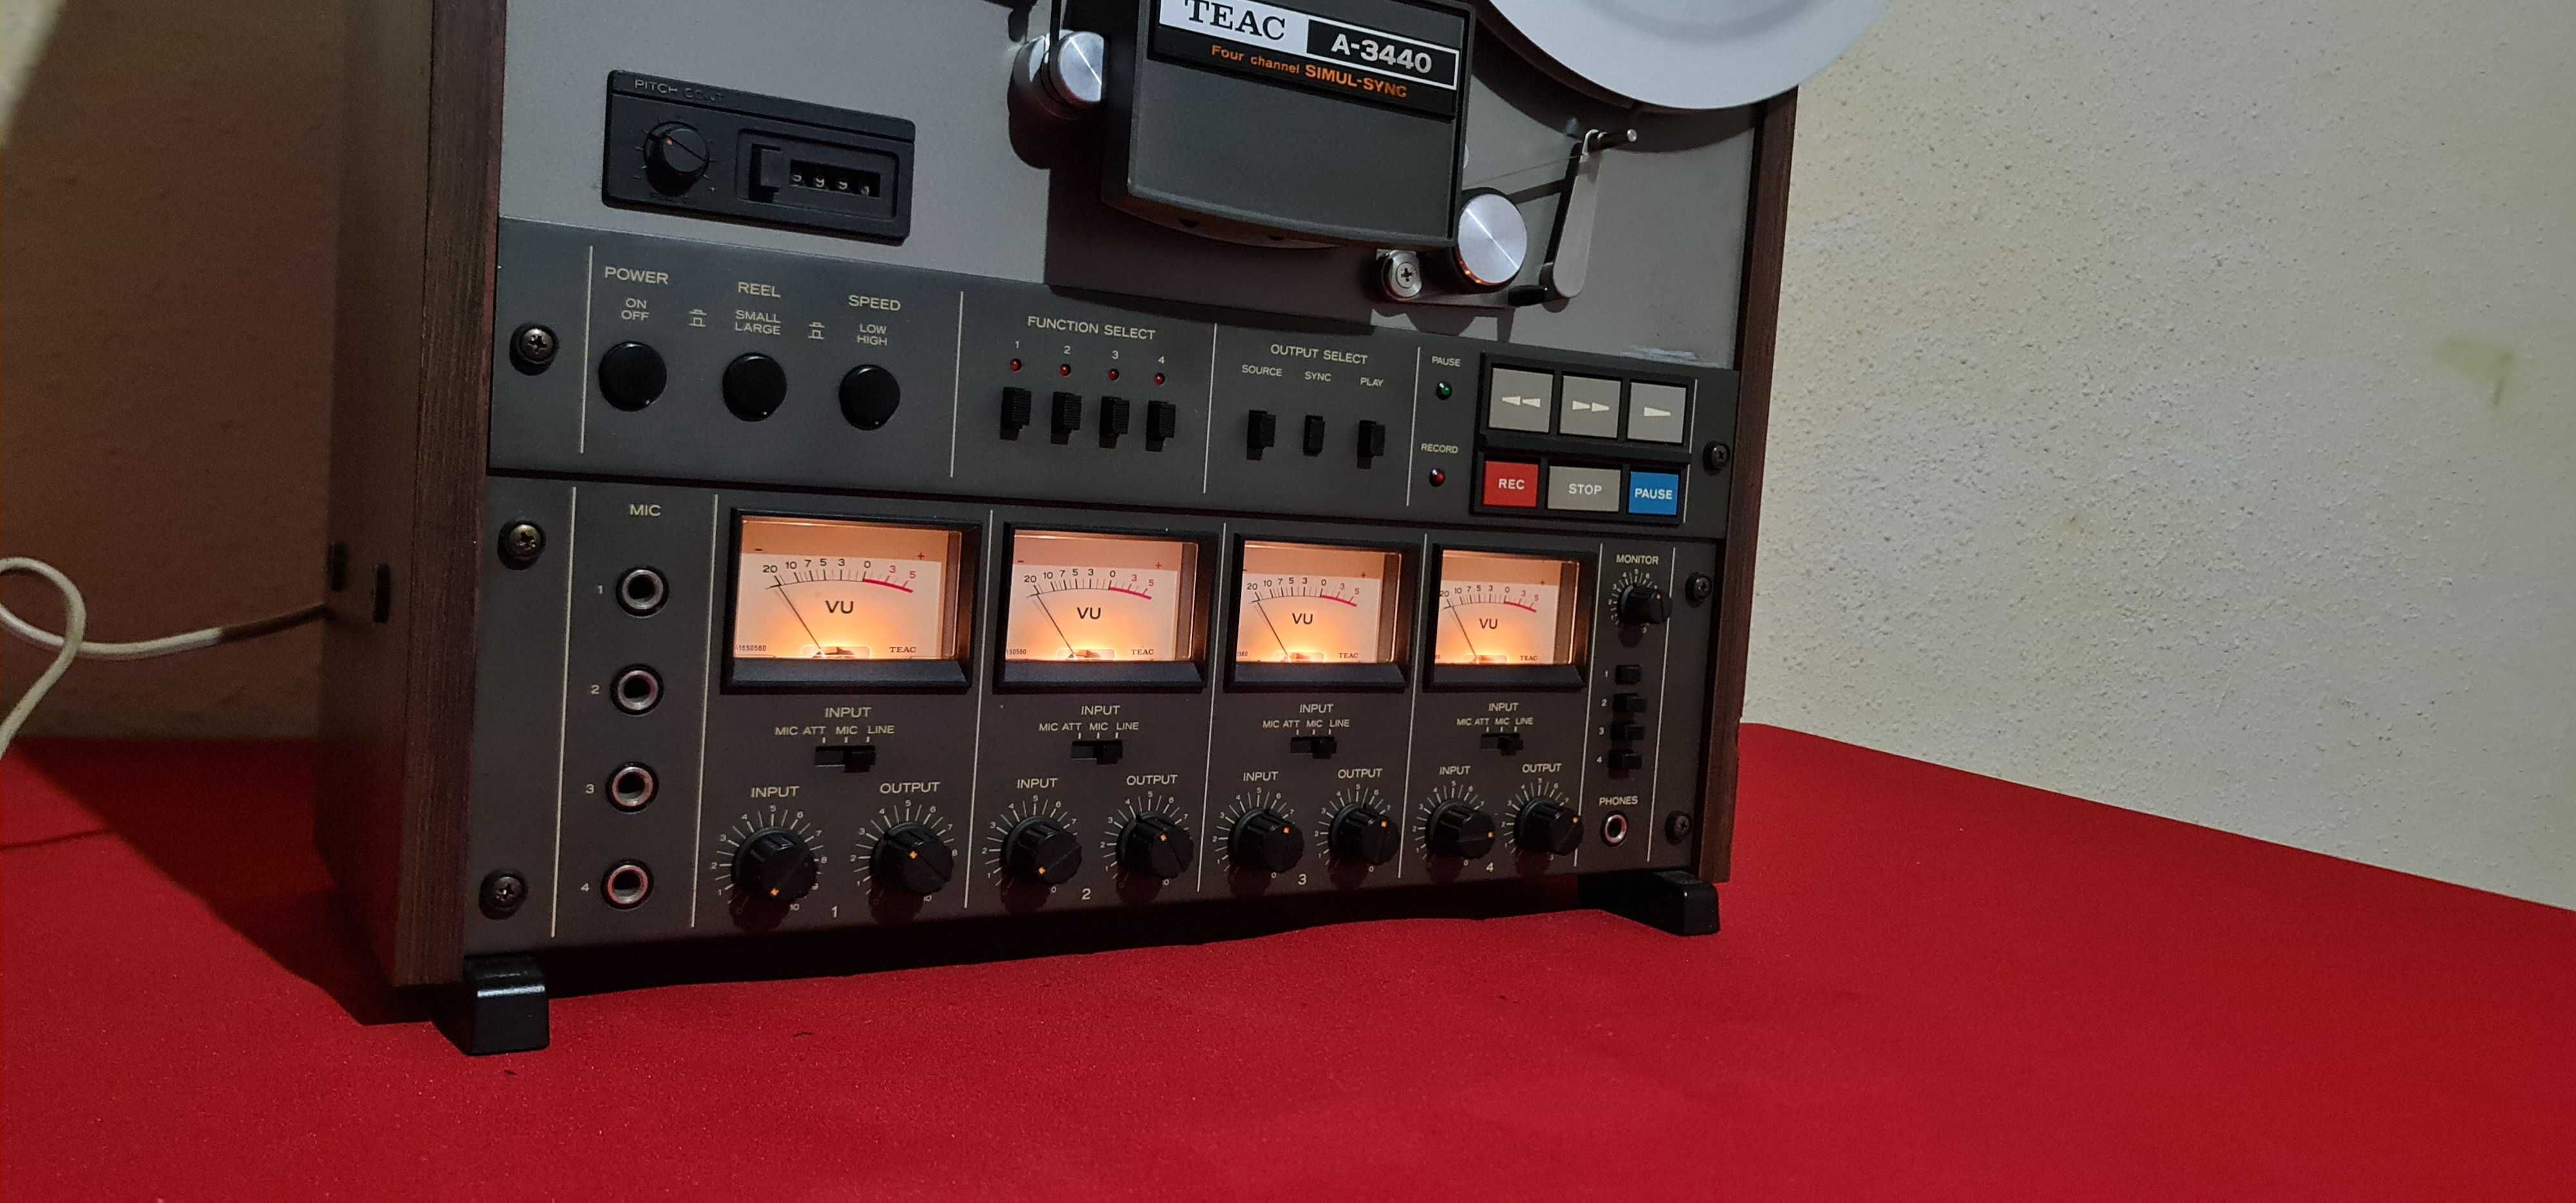 TEAC A-3440 4-CHANNEL Made in Japan